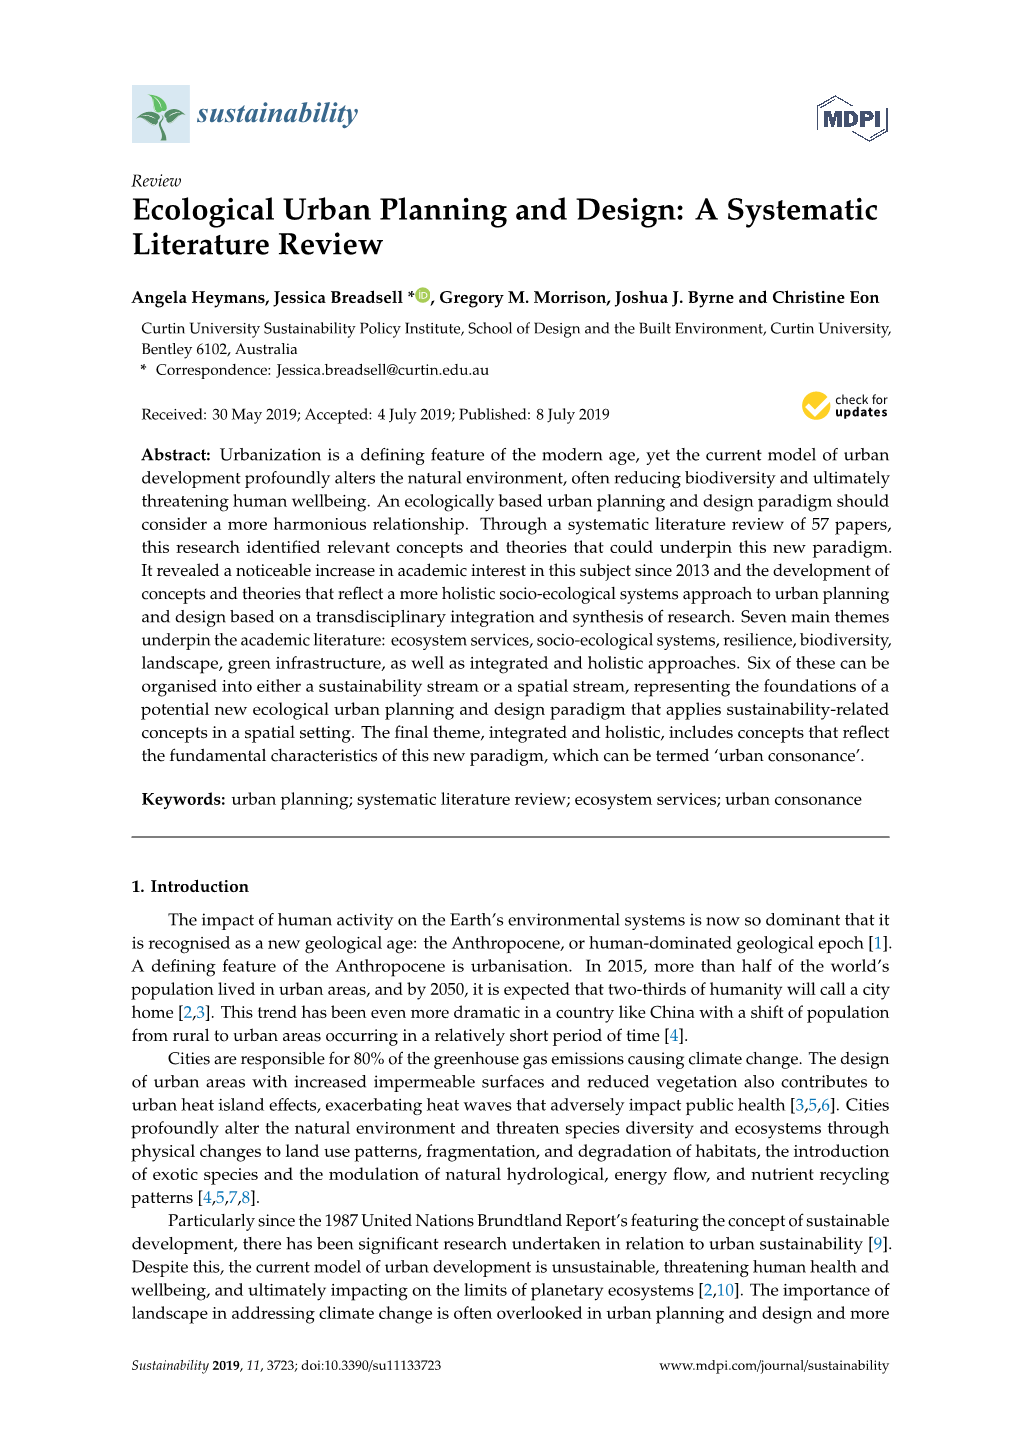 Ecological Urban Planning and Design: a Systematic Literature Review